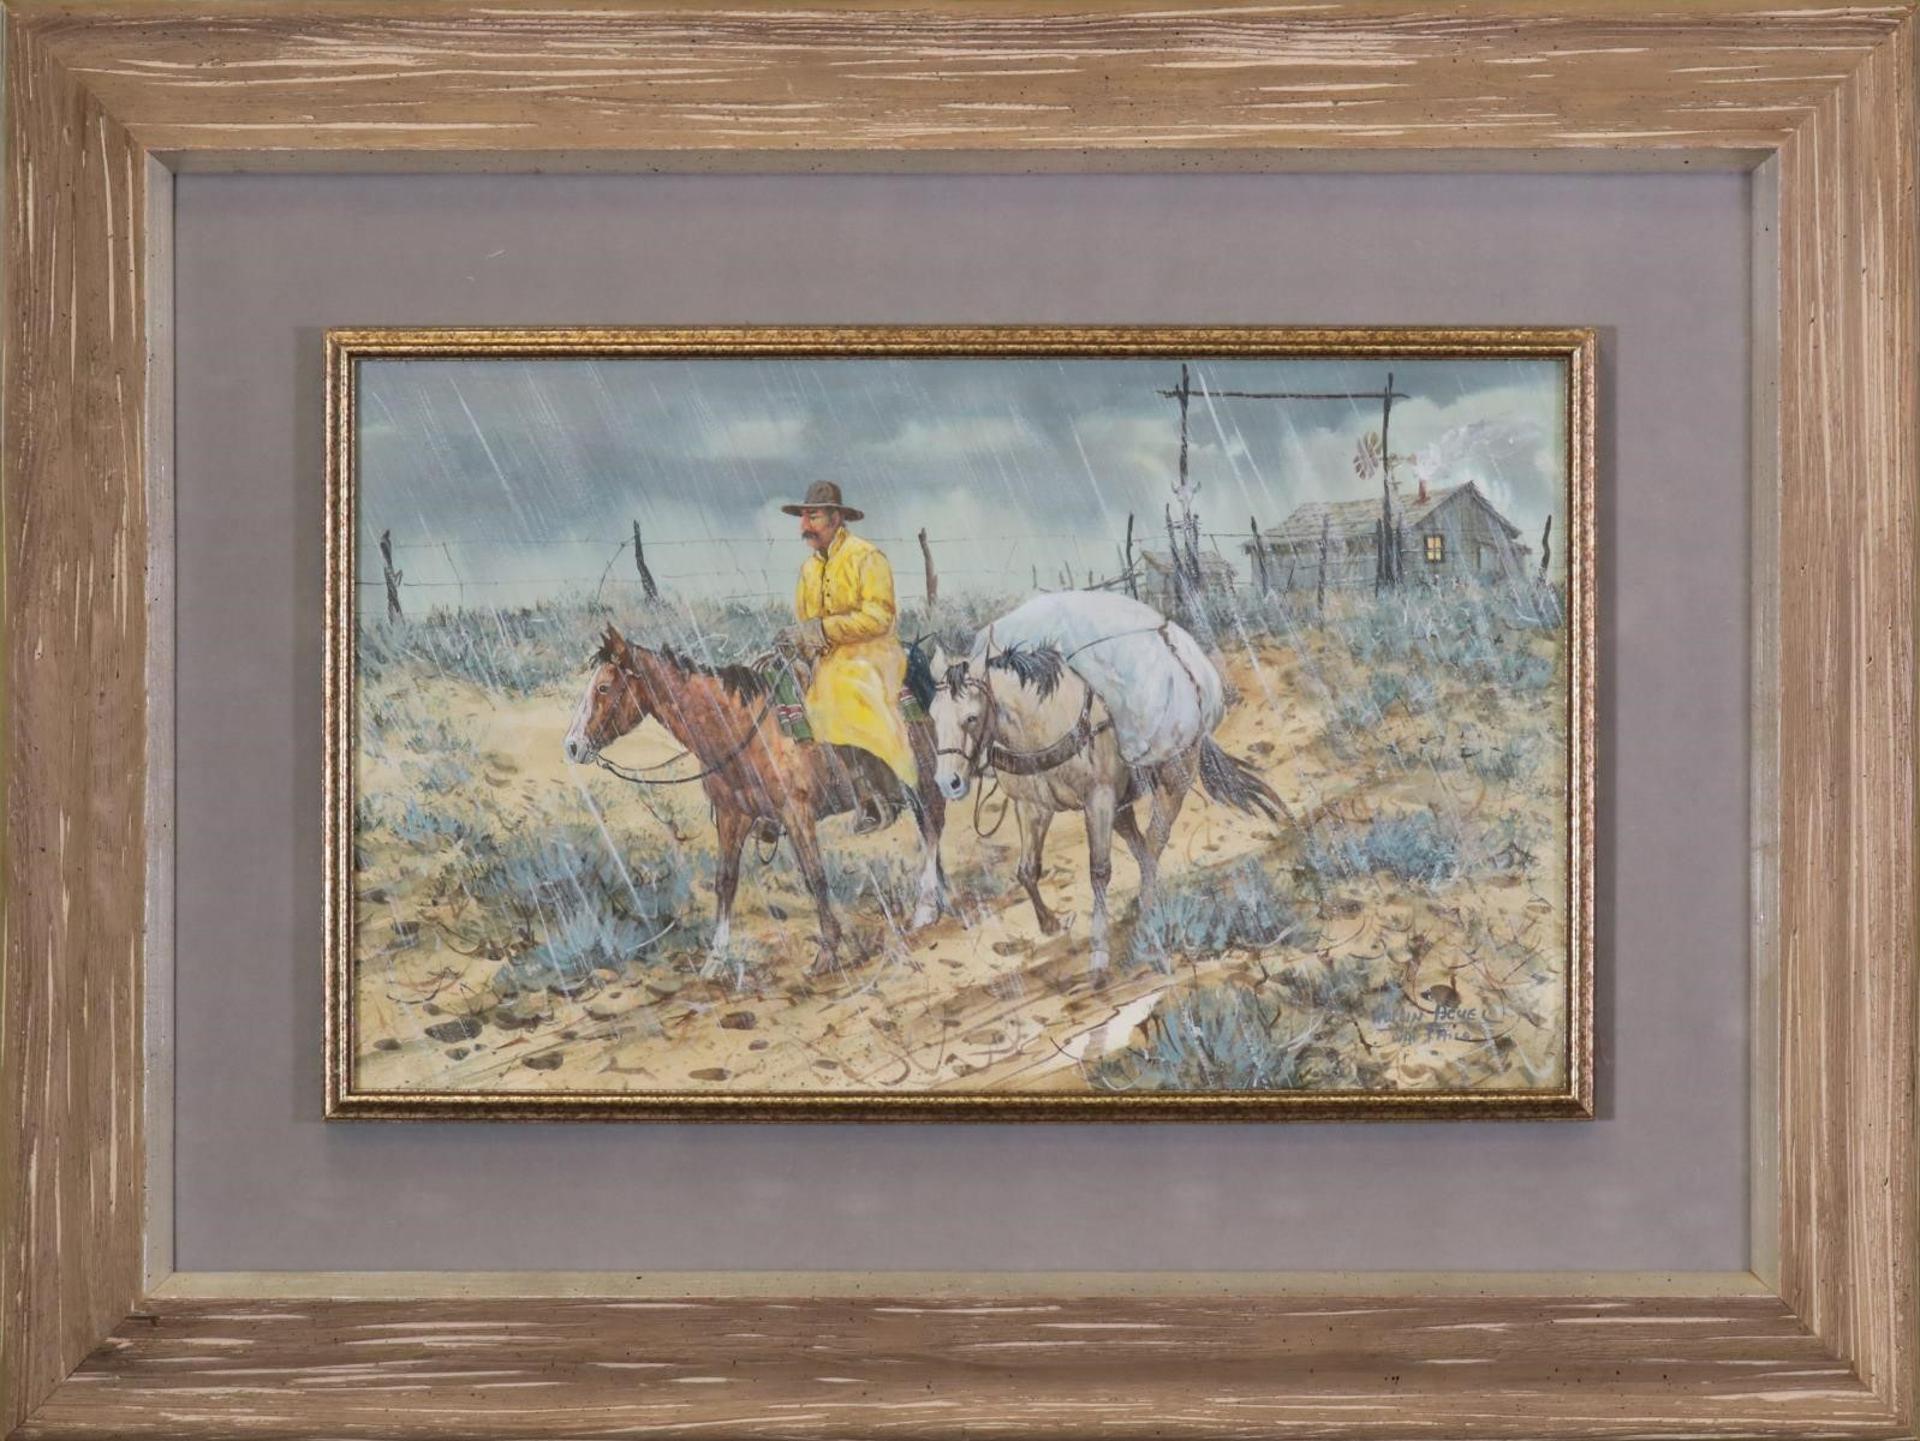 Austin Deuel (1939) - Untitled, Cowboy with Two Horses Riding in the Rain